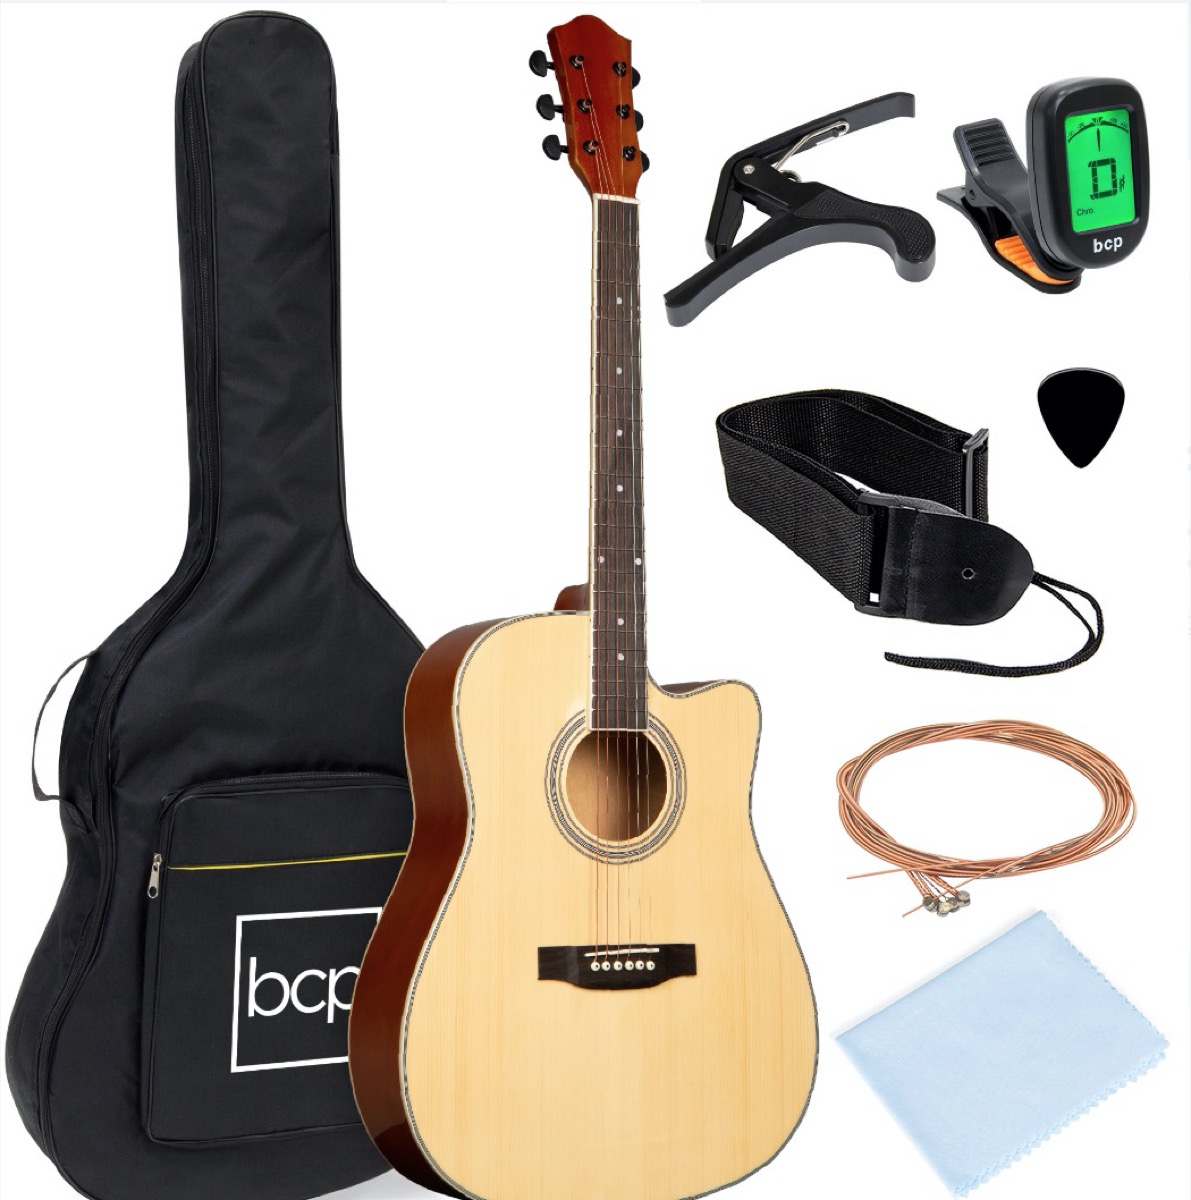 guitar kit with capo, tuner, strings, and case